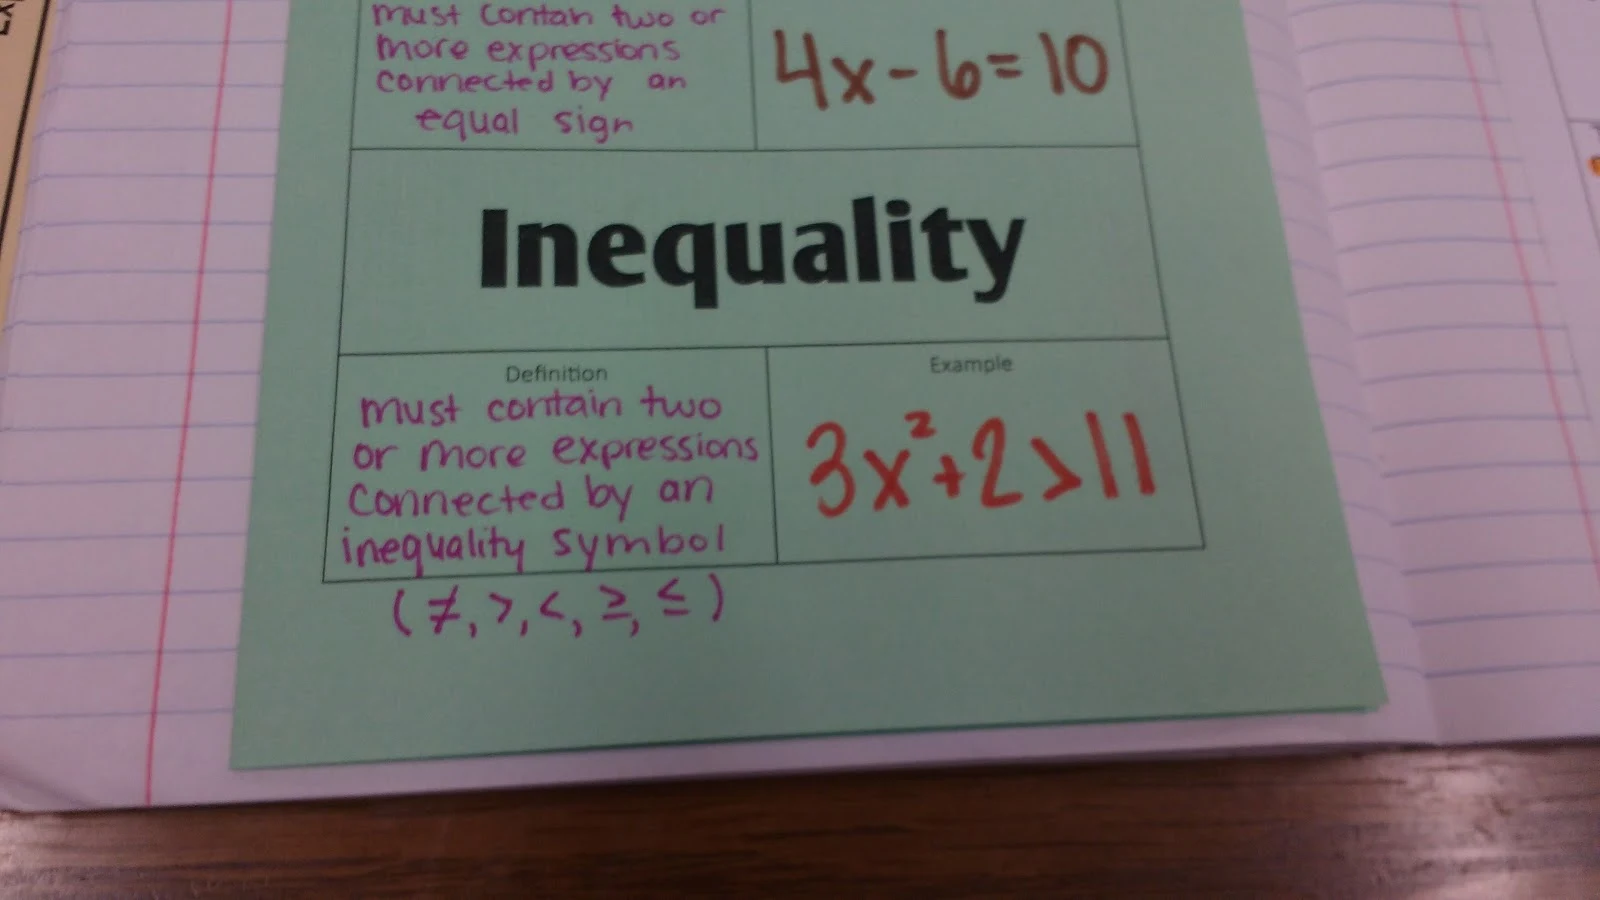 Expression vs Equation vs Inequality Notes. 